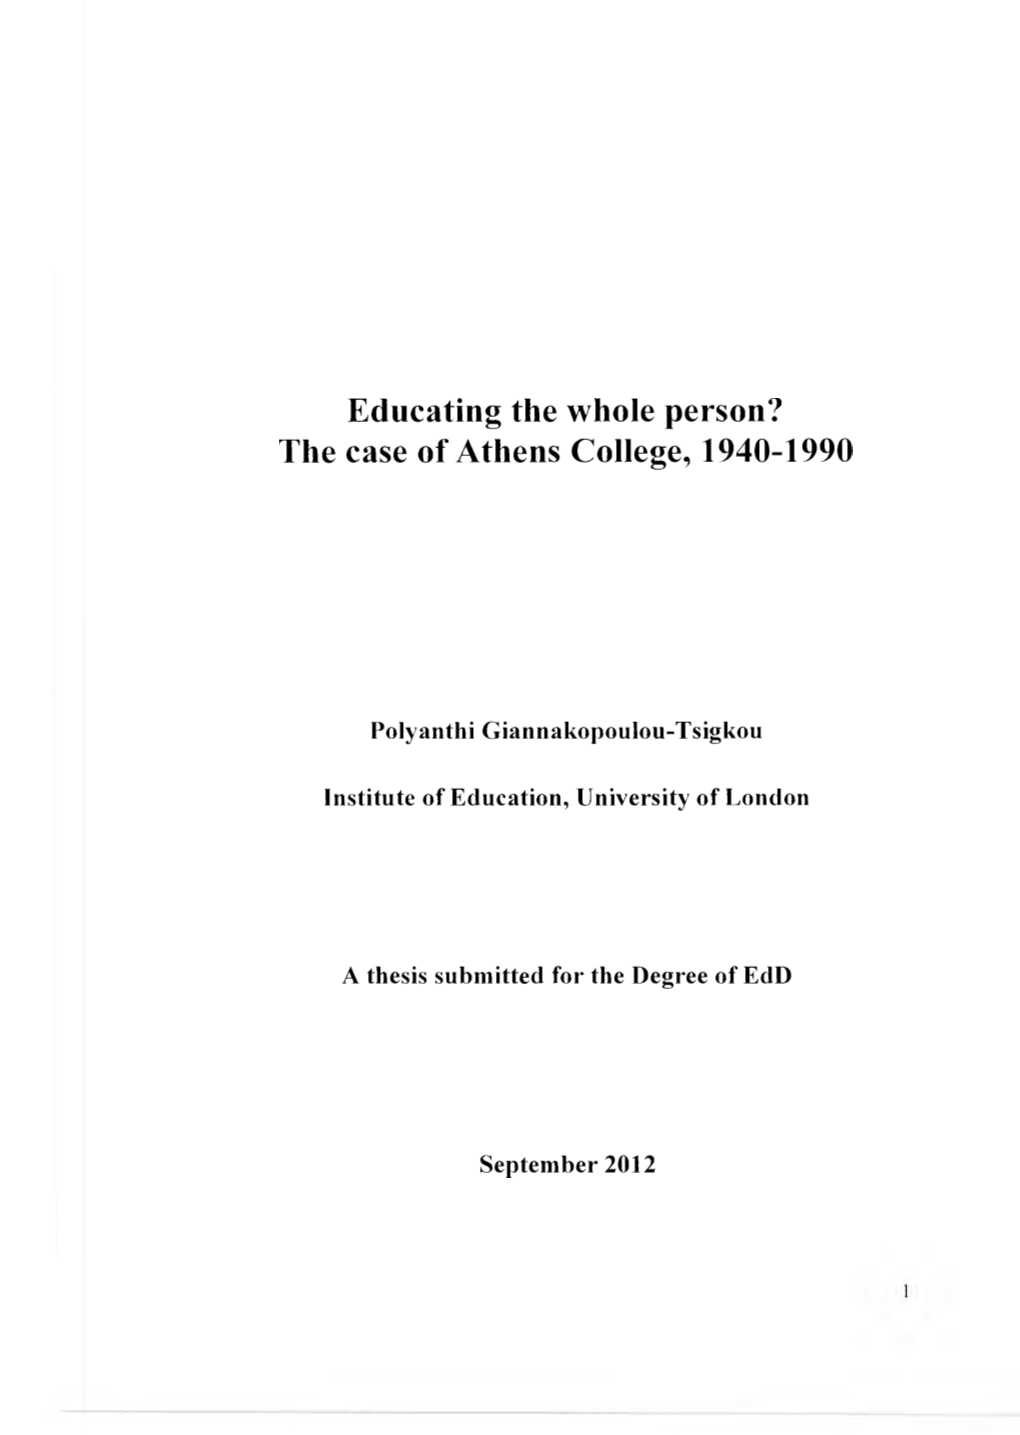 Educating the Whole Person? the Case of Athens College, 1940-1990